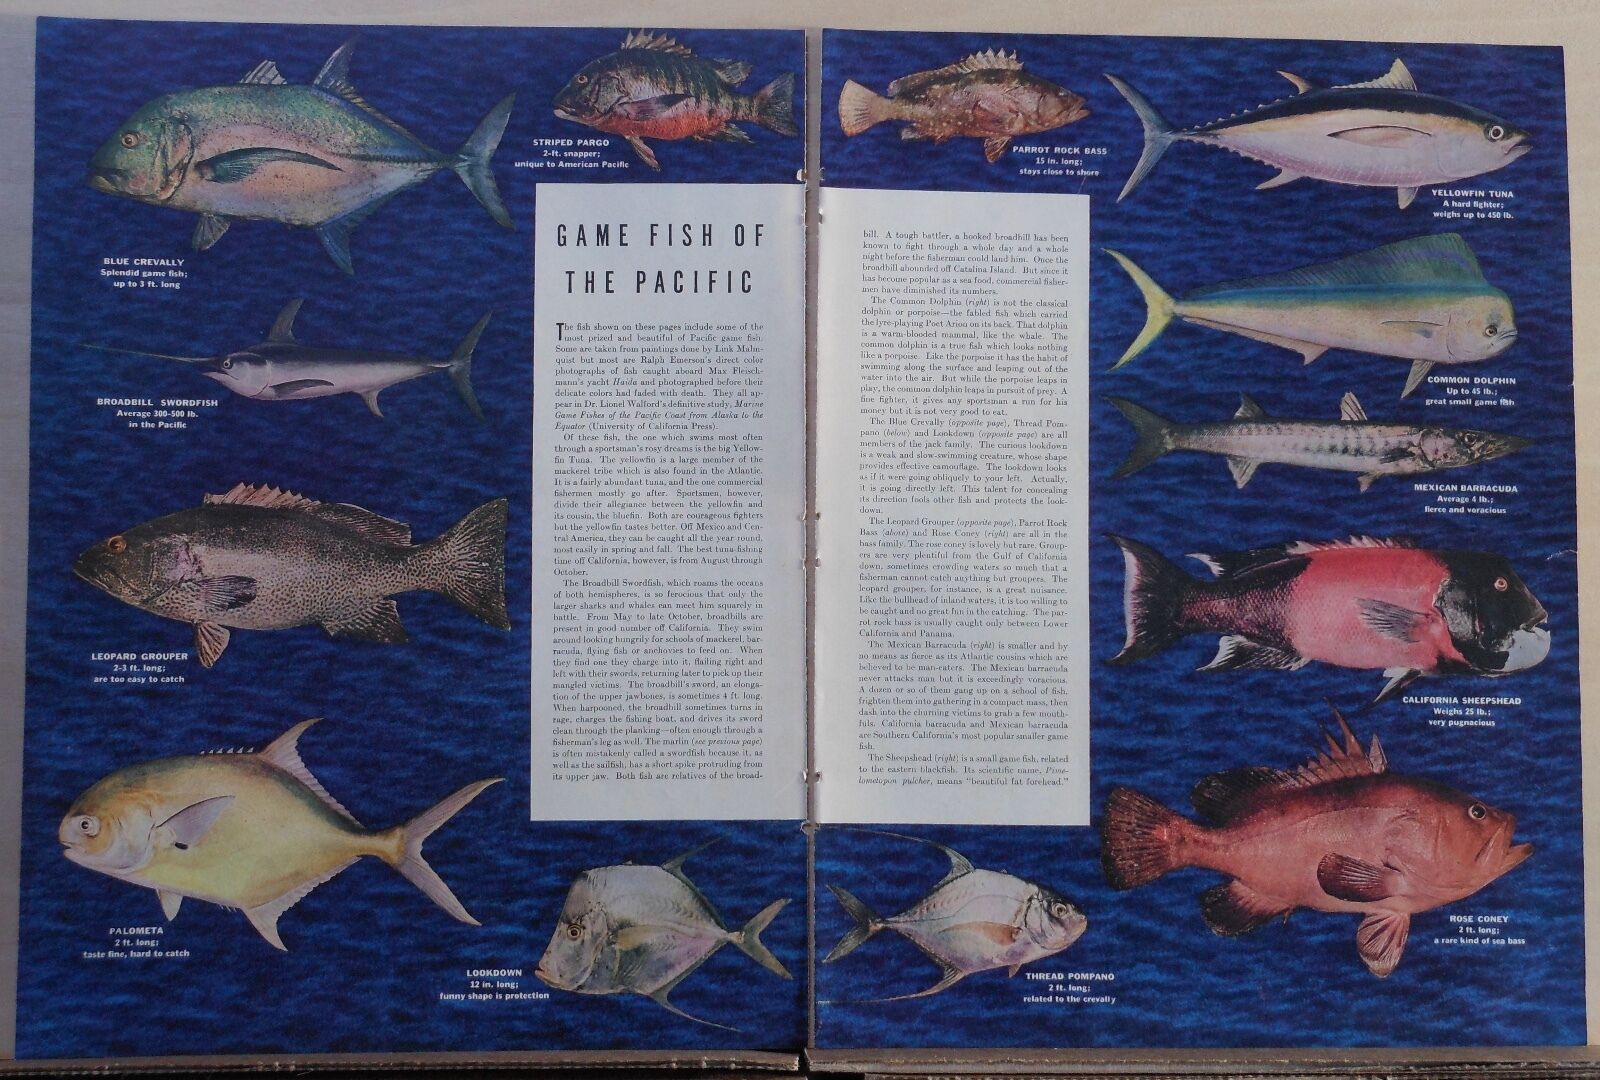 1939 magazine pictorial of Game Fish of The Pacific - thirteen colorful fish